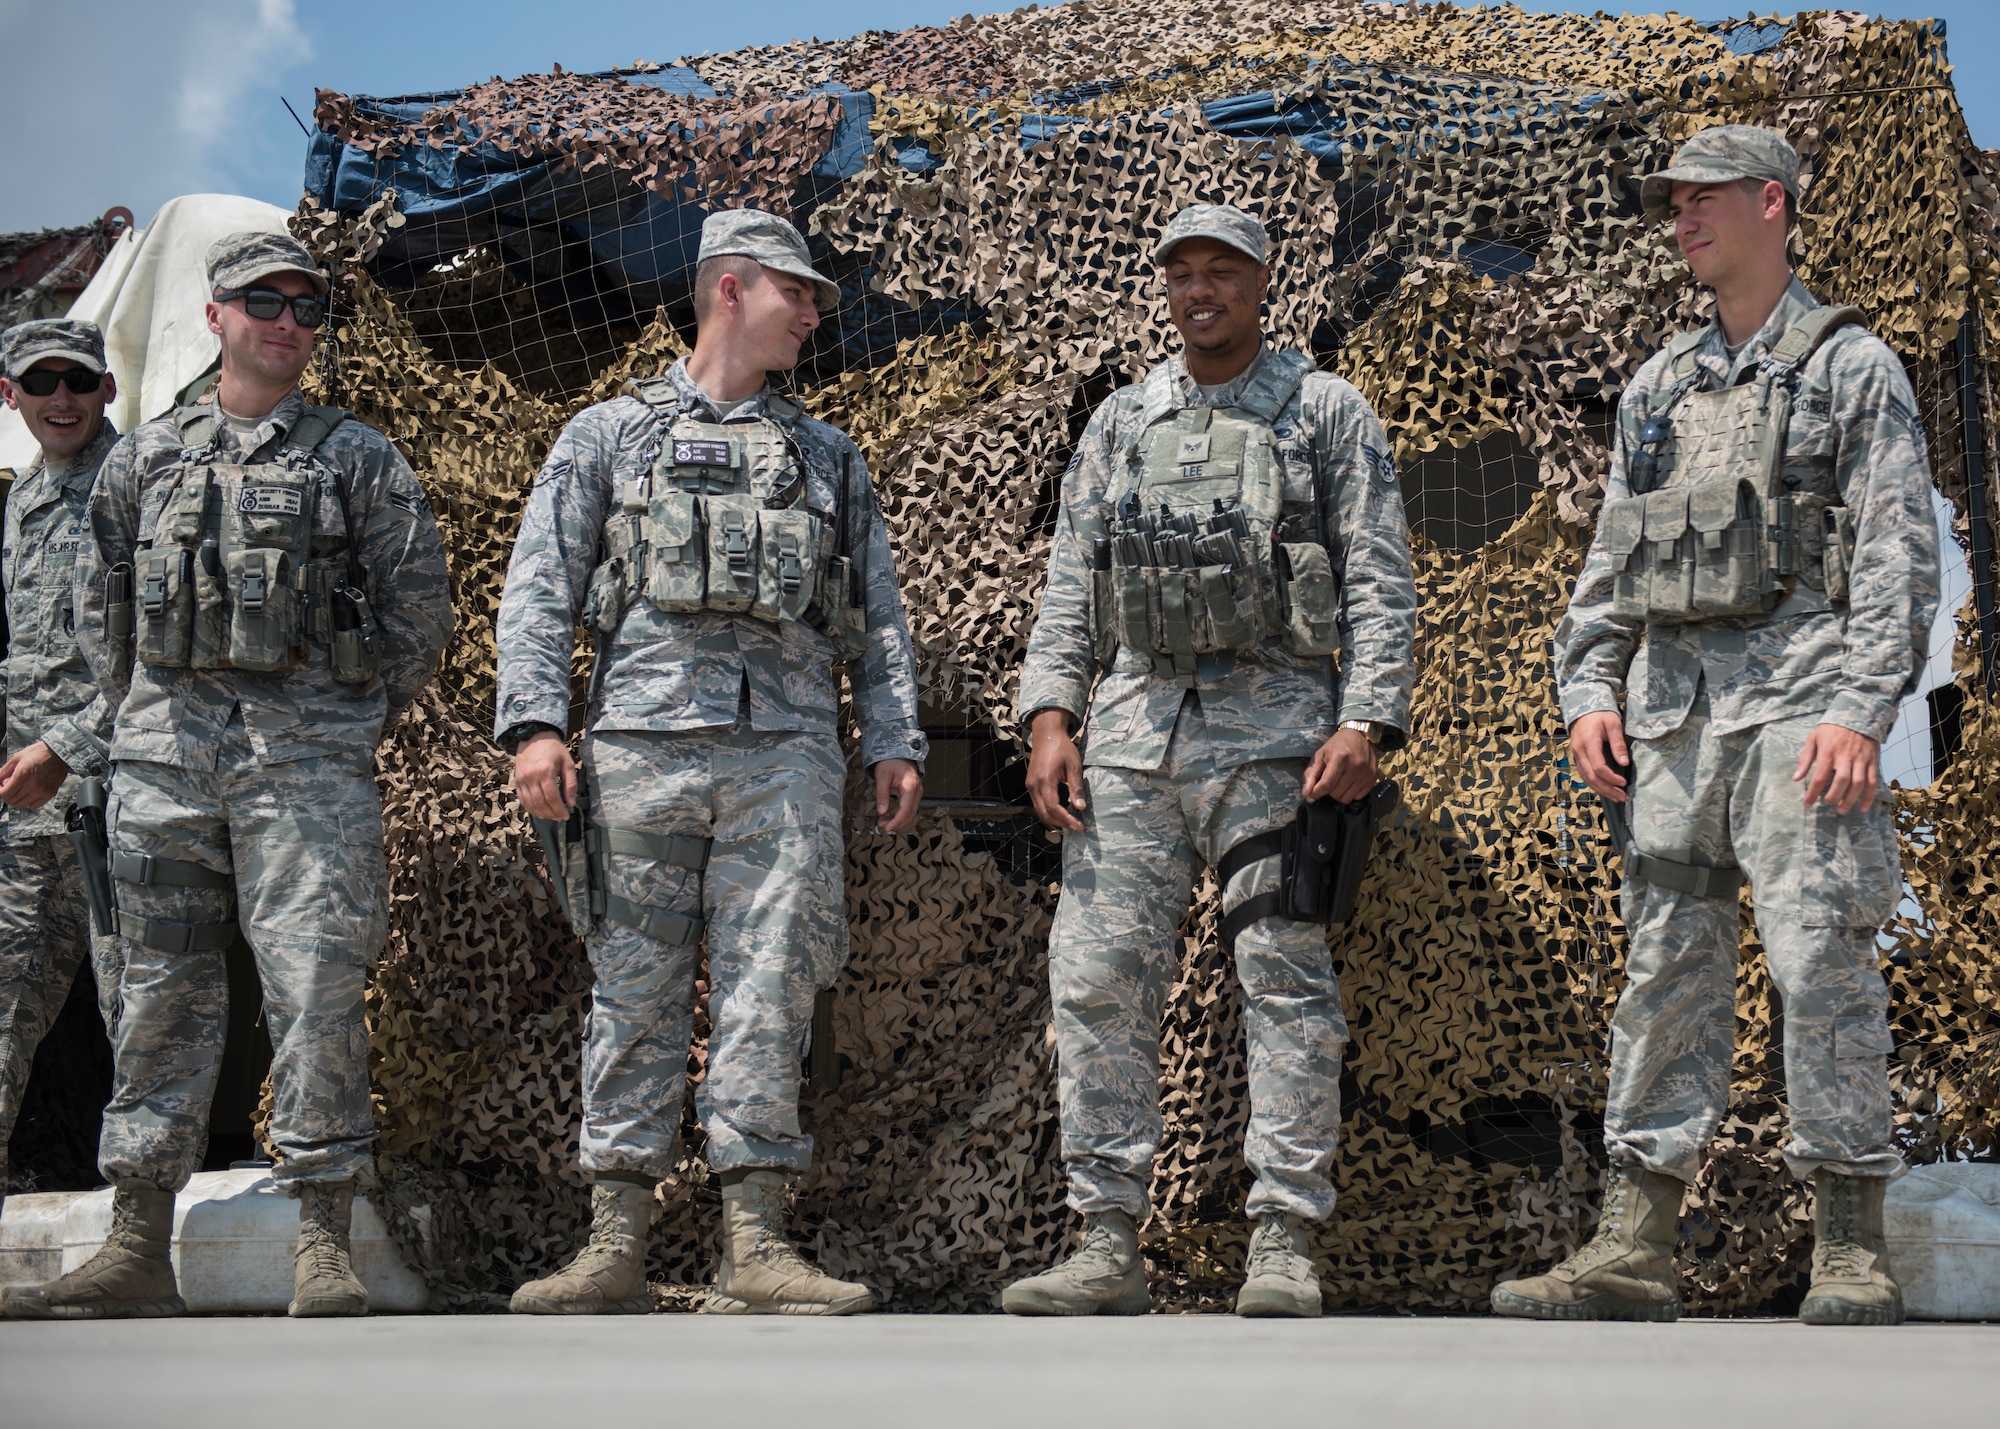 IU.S. Air Force 39th Security Forces Squadron contingency members guard a flight line access point at Incirlik Air Base, Turkey, June 21, 2018.